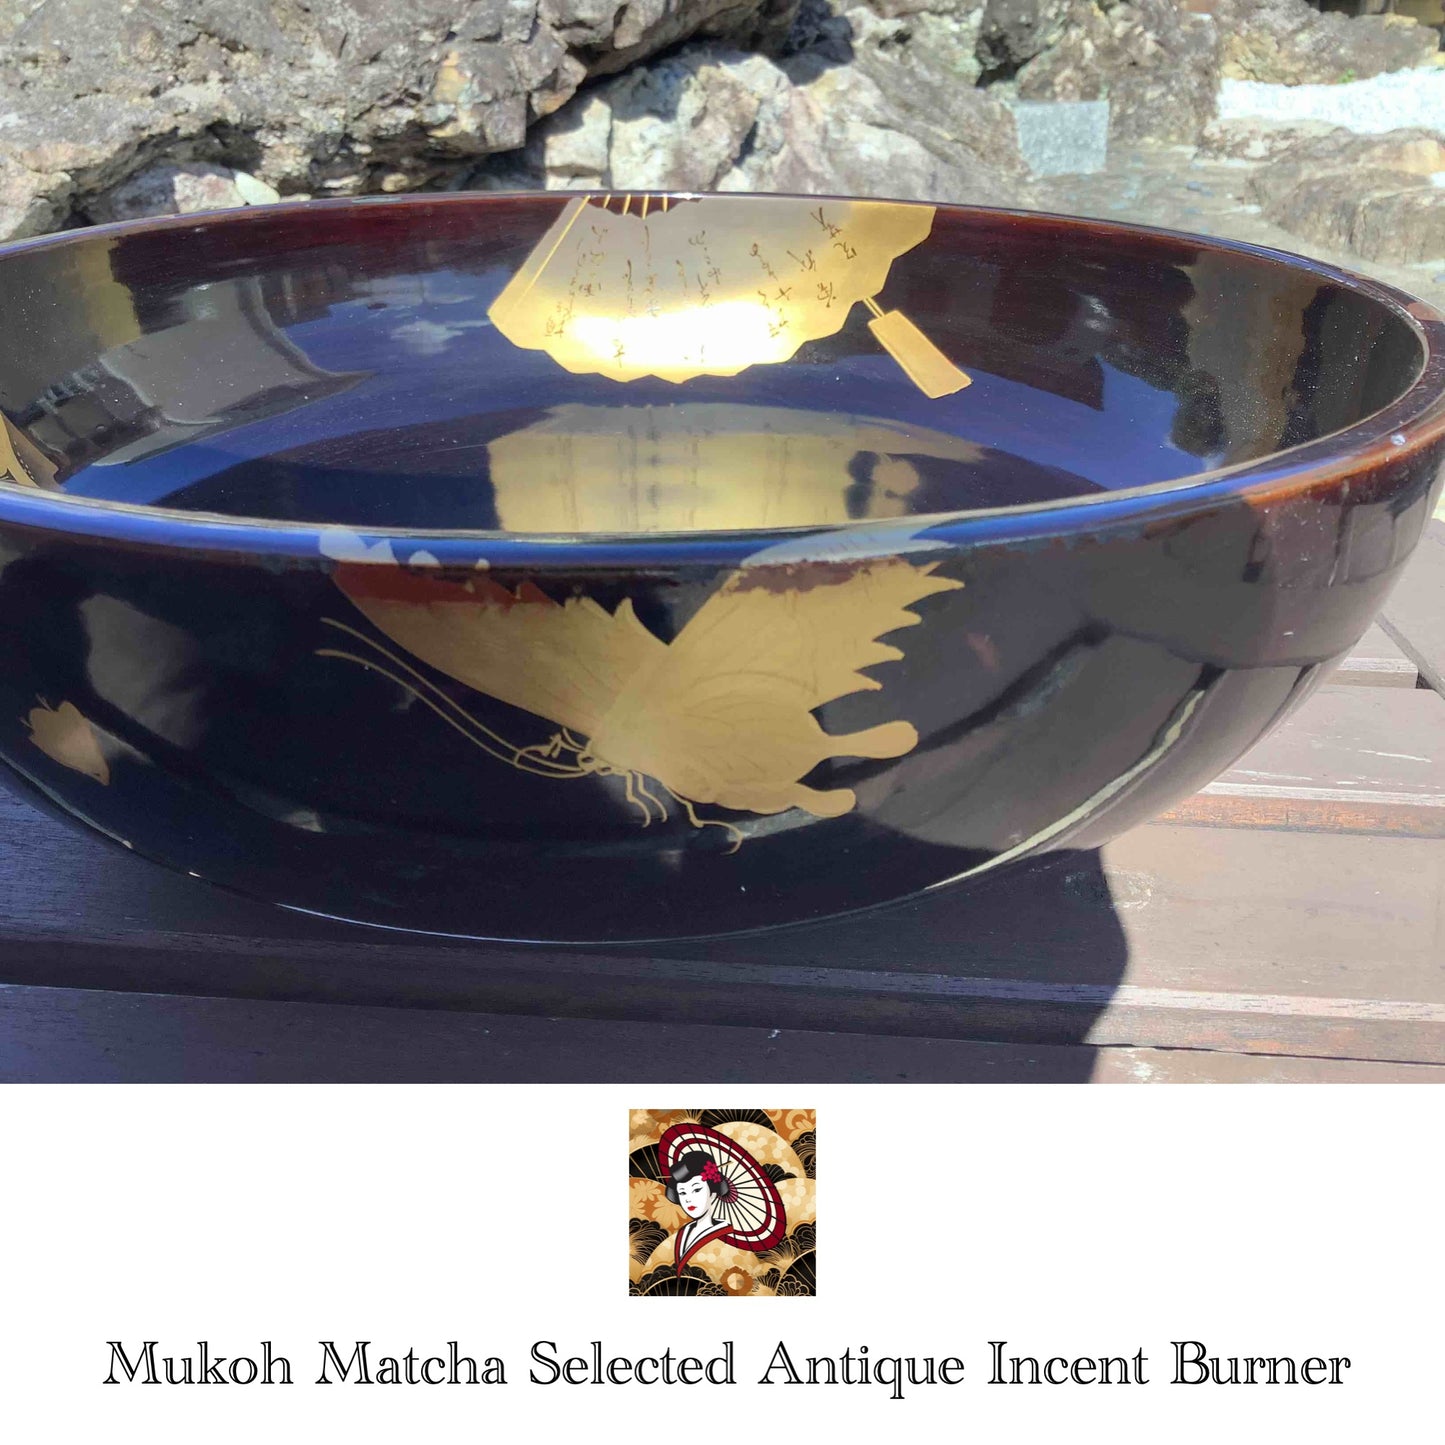 [Antique] Lacquerware Black Gold pattern Large Plate Japanese vintage - Mukoh Matcha Selected